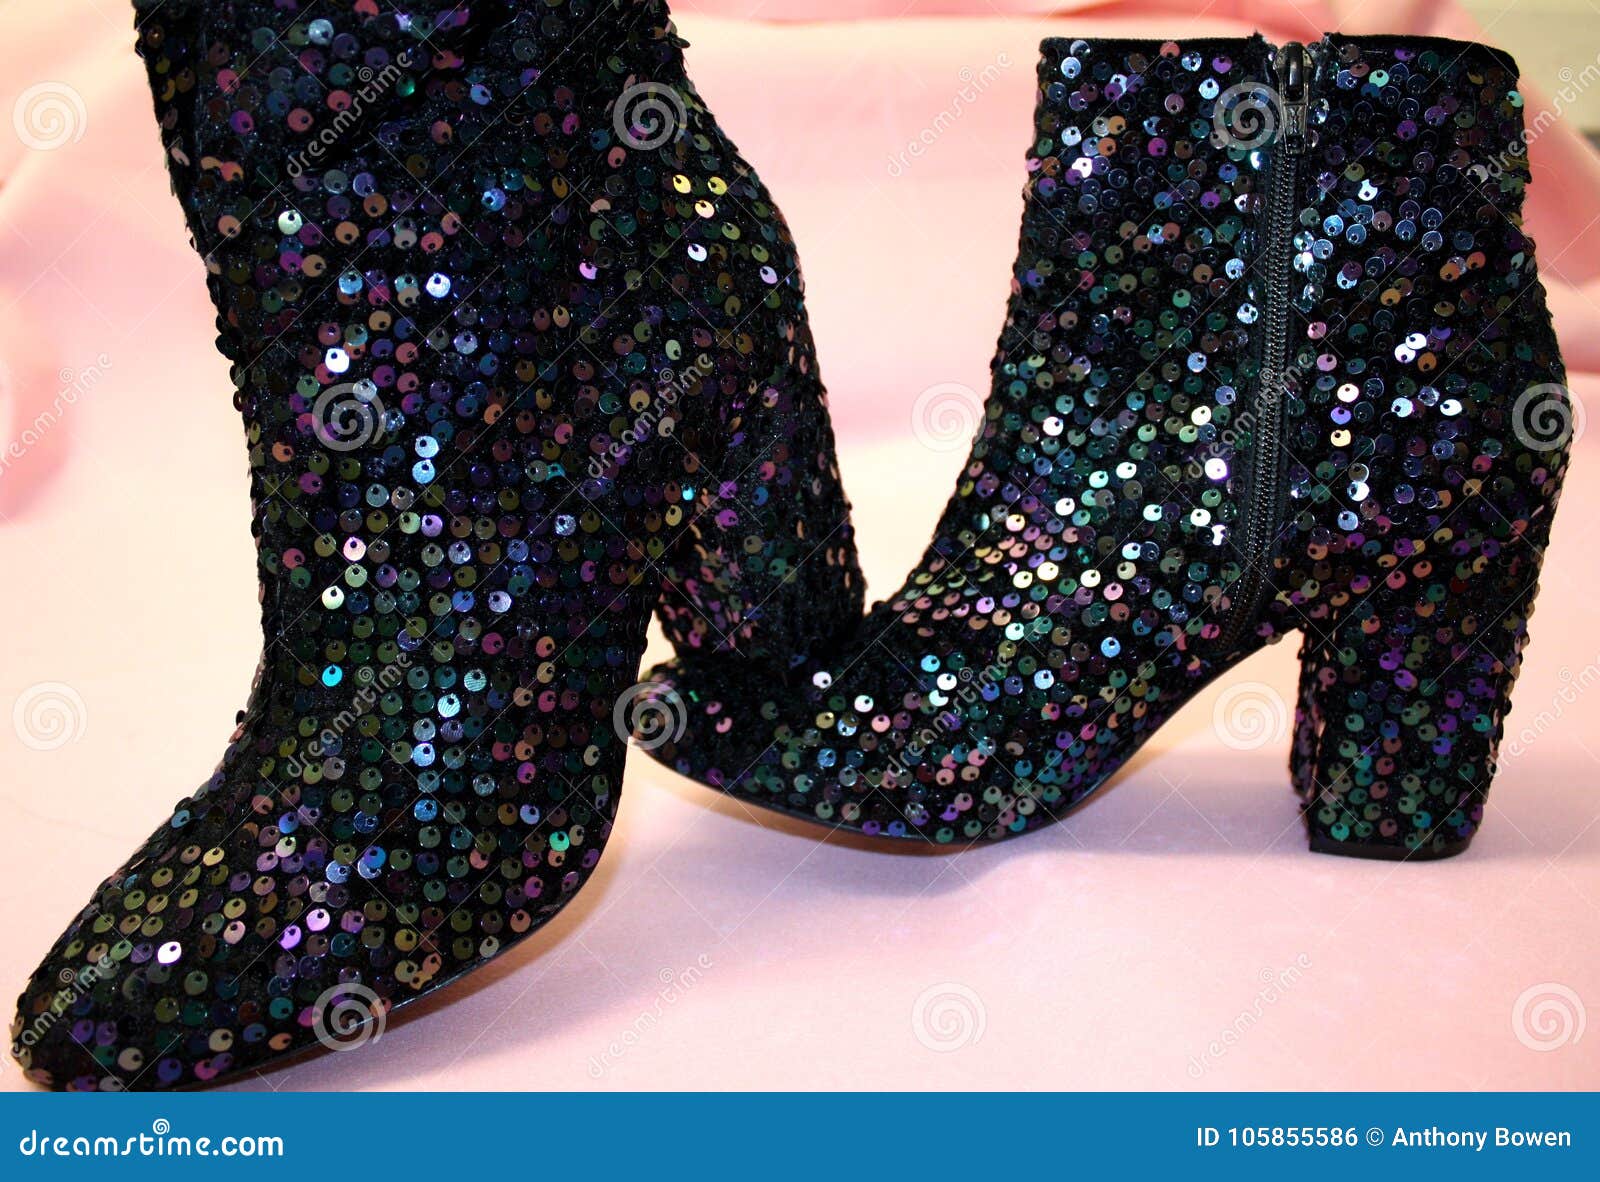 Lovely Black Sparkly Sequin Fur Lined Boots BNWOT George 